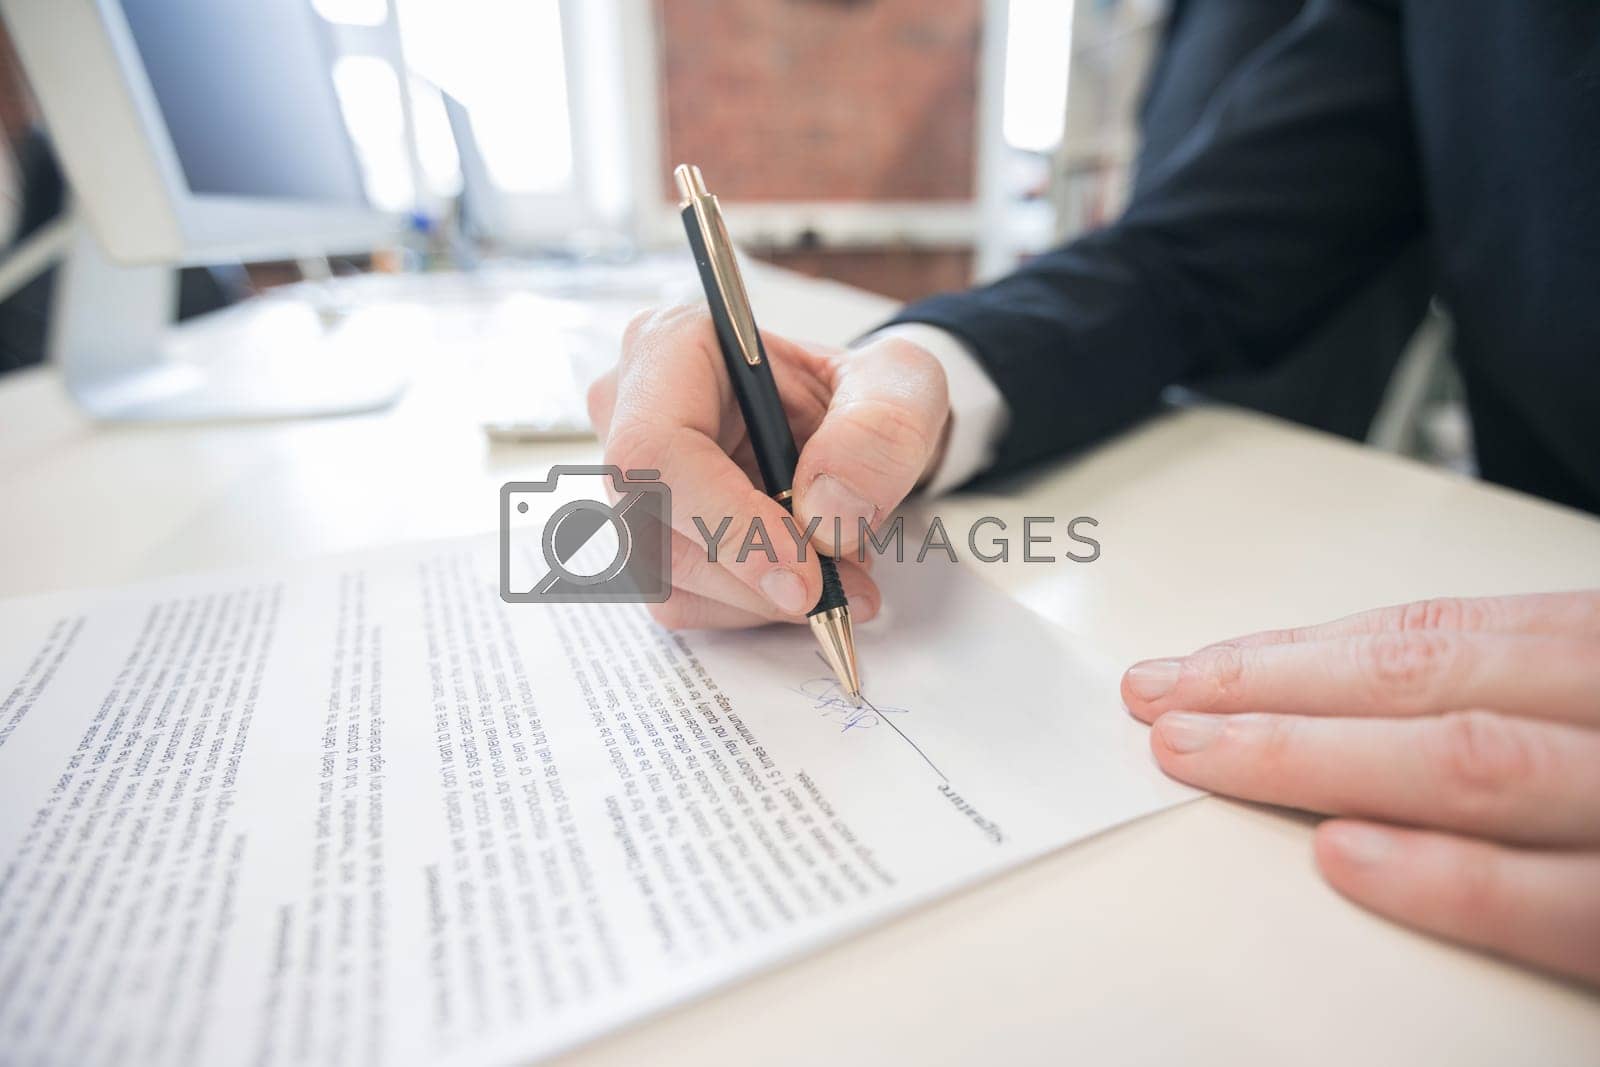 Royalty free image of Businessman signing a contract by Yellowj